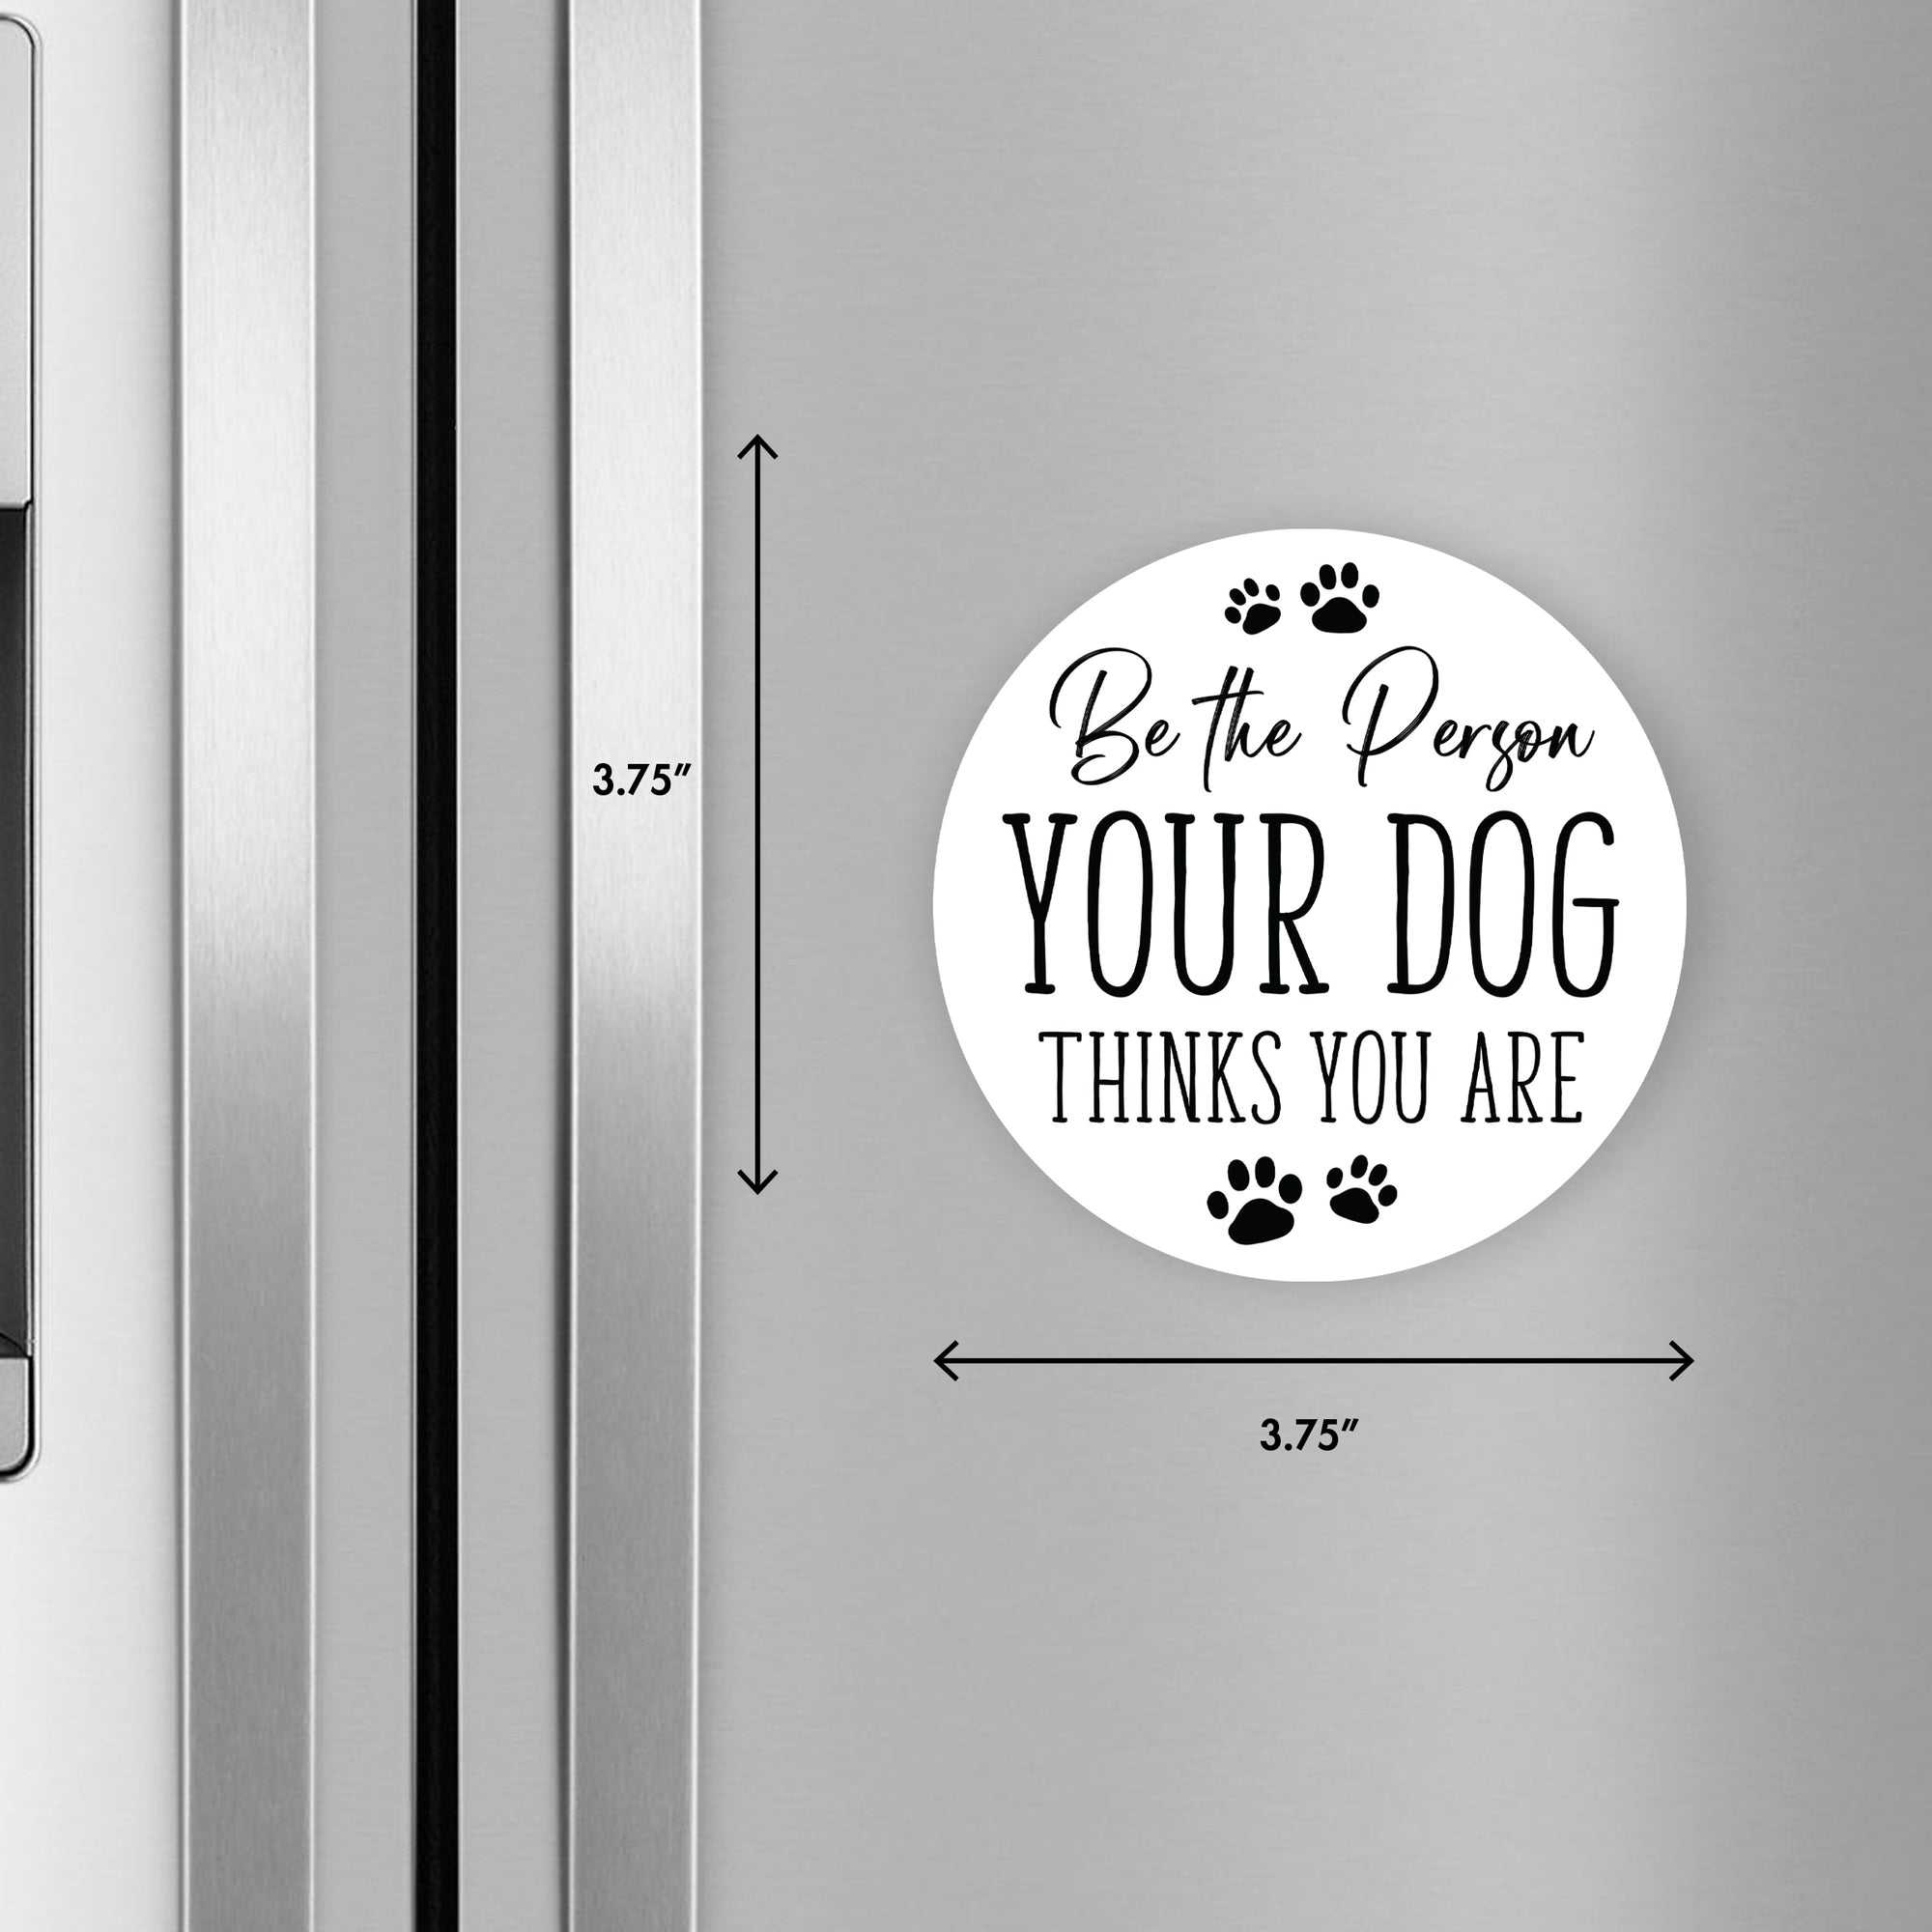 Refrigerator Magnet Perfect Gift Idea For Pet Owners - Be The Person